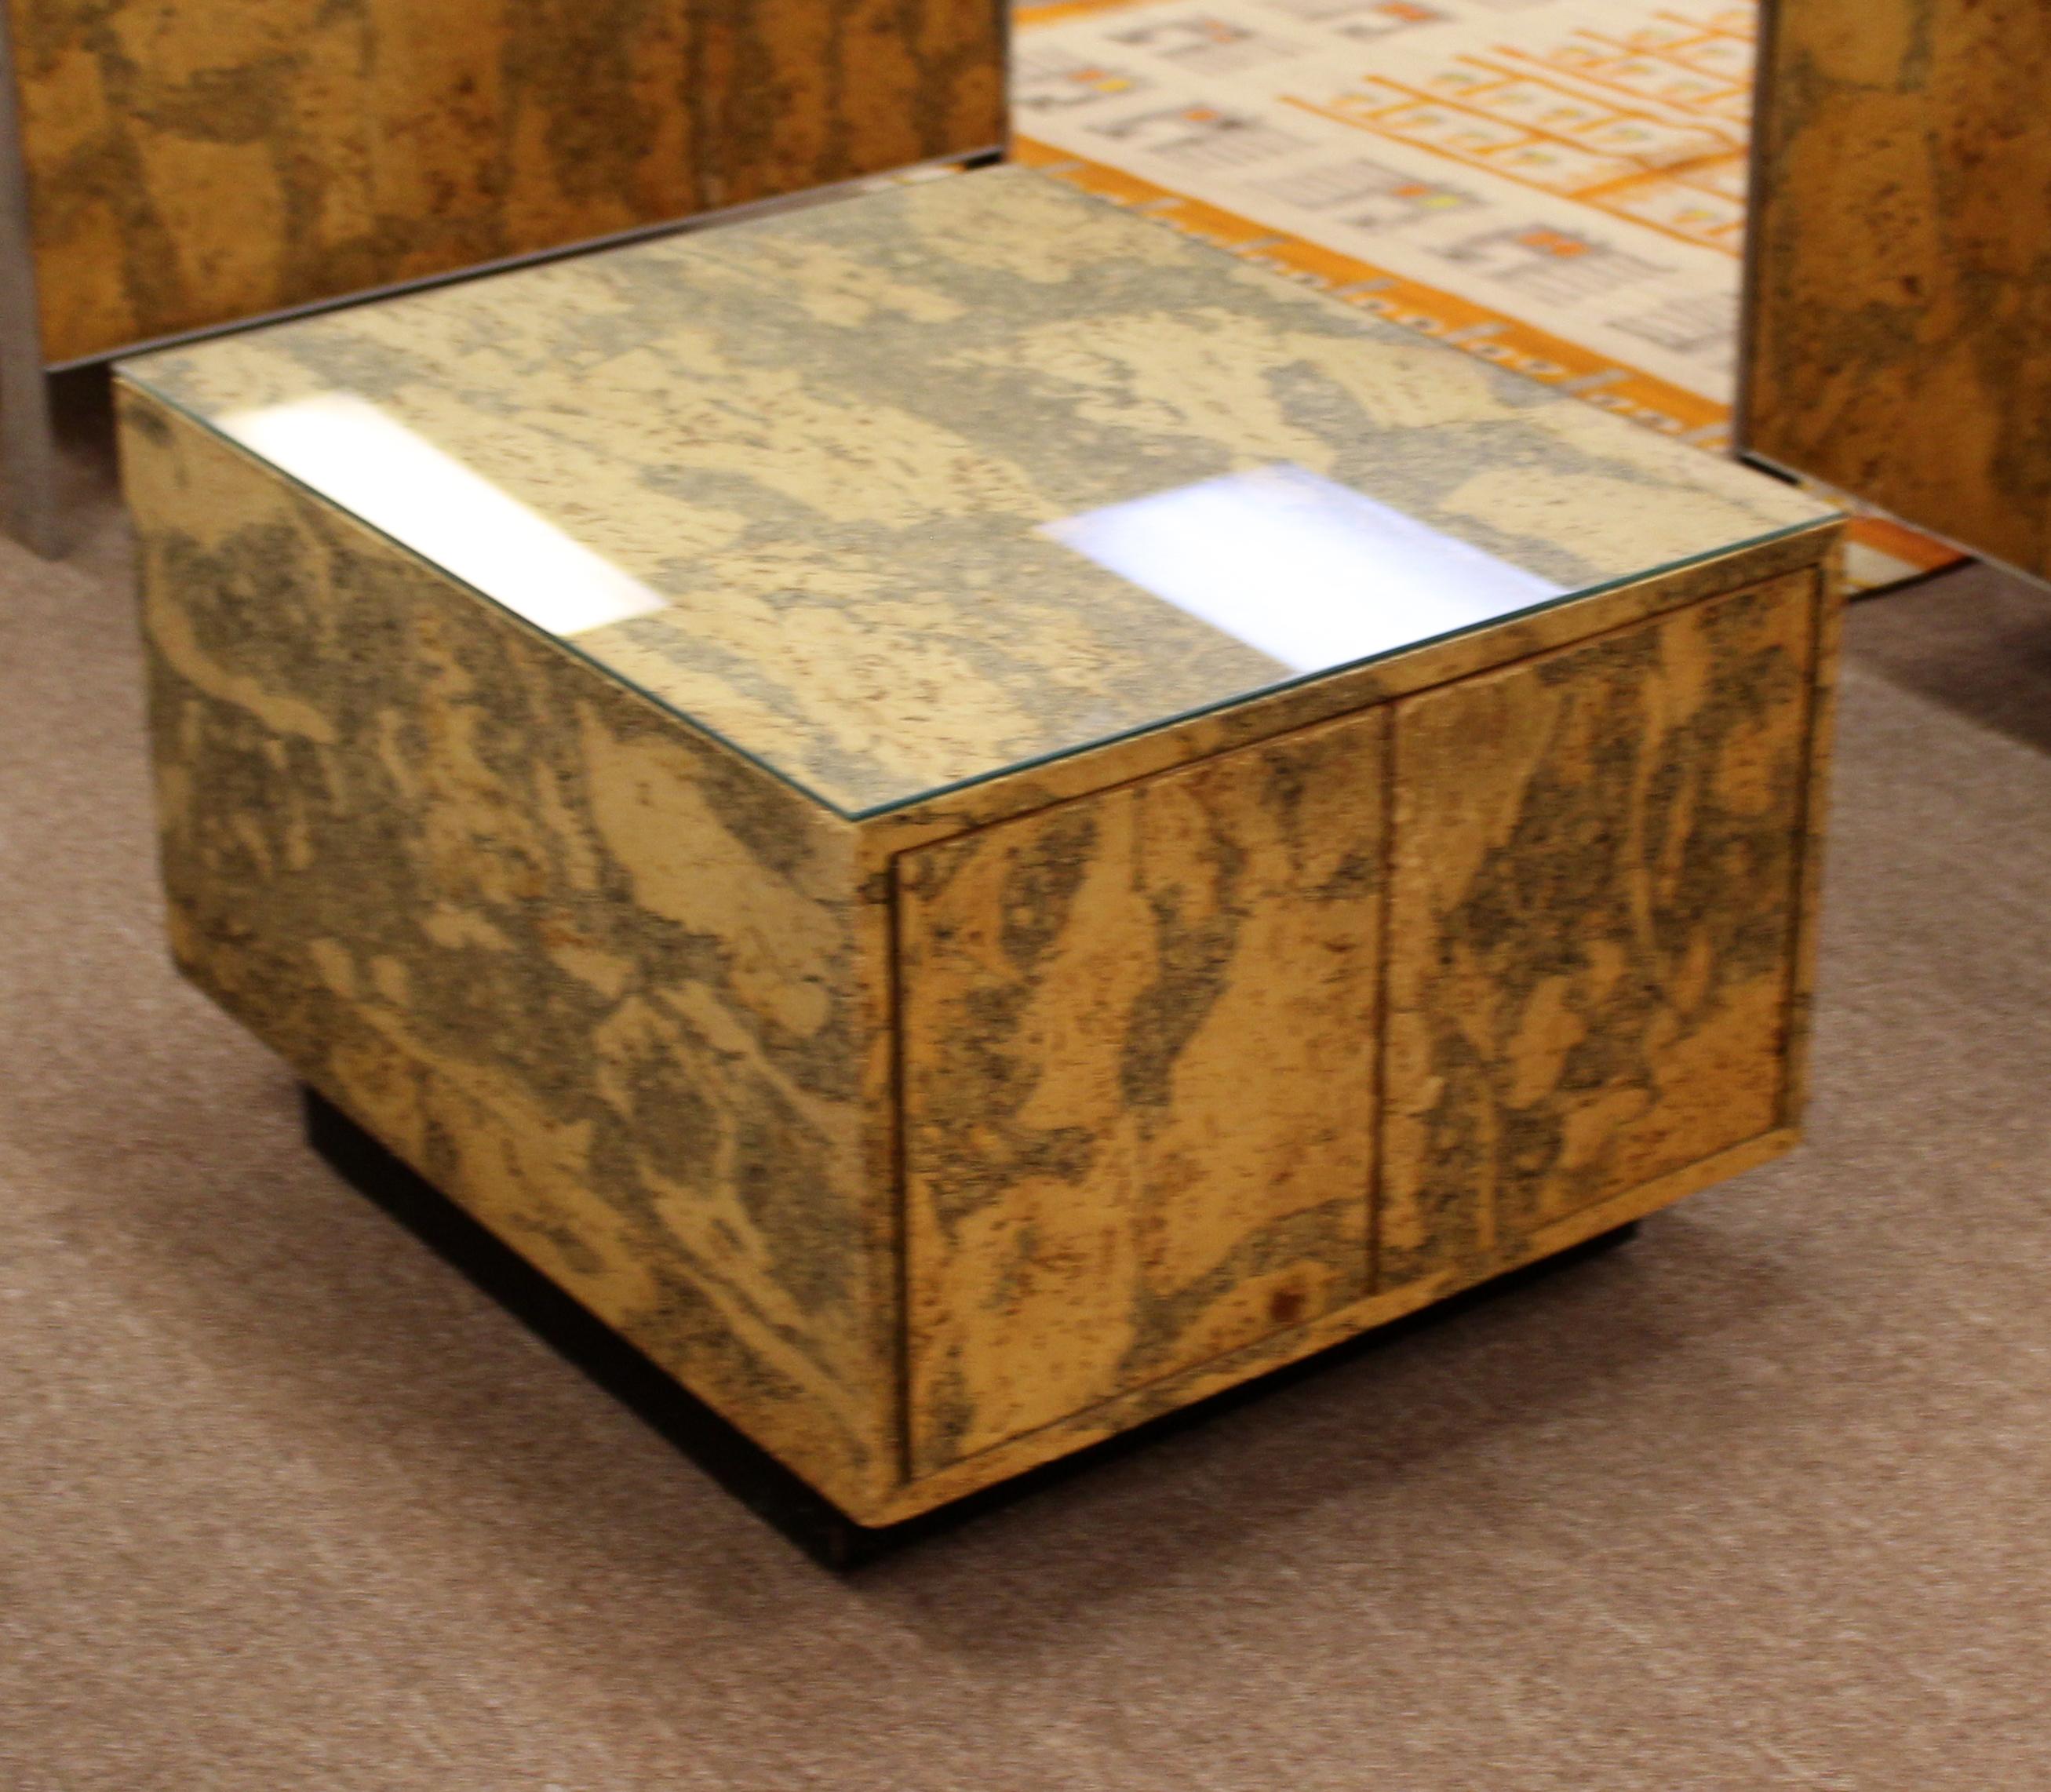 For your consideration is a fantastic end table, made of cork and with a glass top and doors that open to storage space, by Adrian Pearsall, circa 1970s. In very good vintage condition. The dimensions are 24